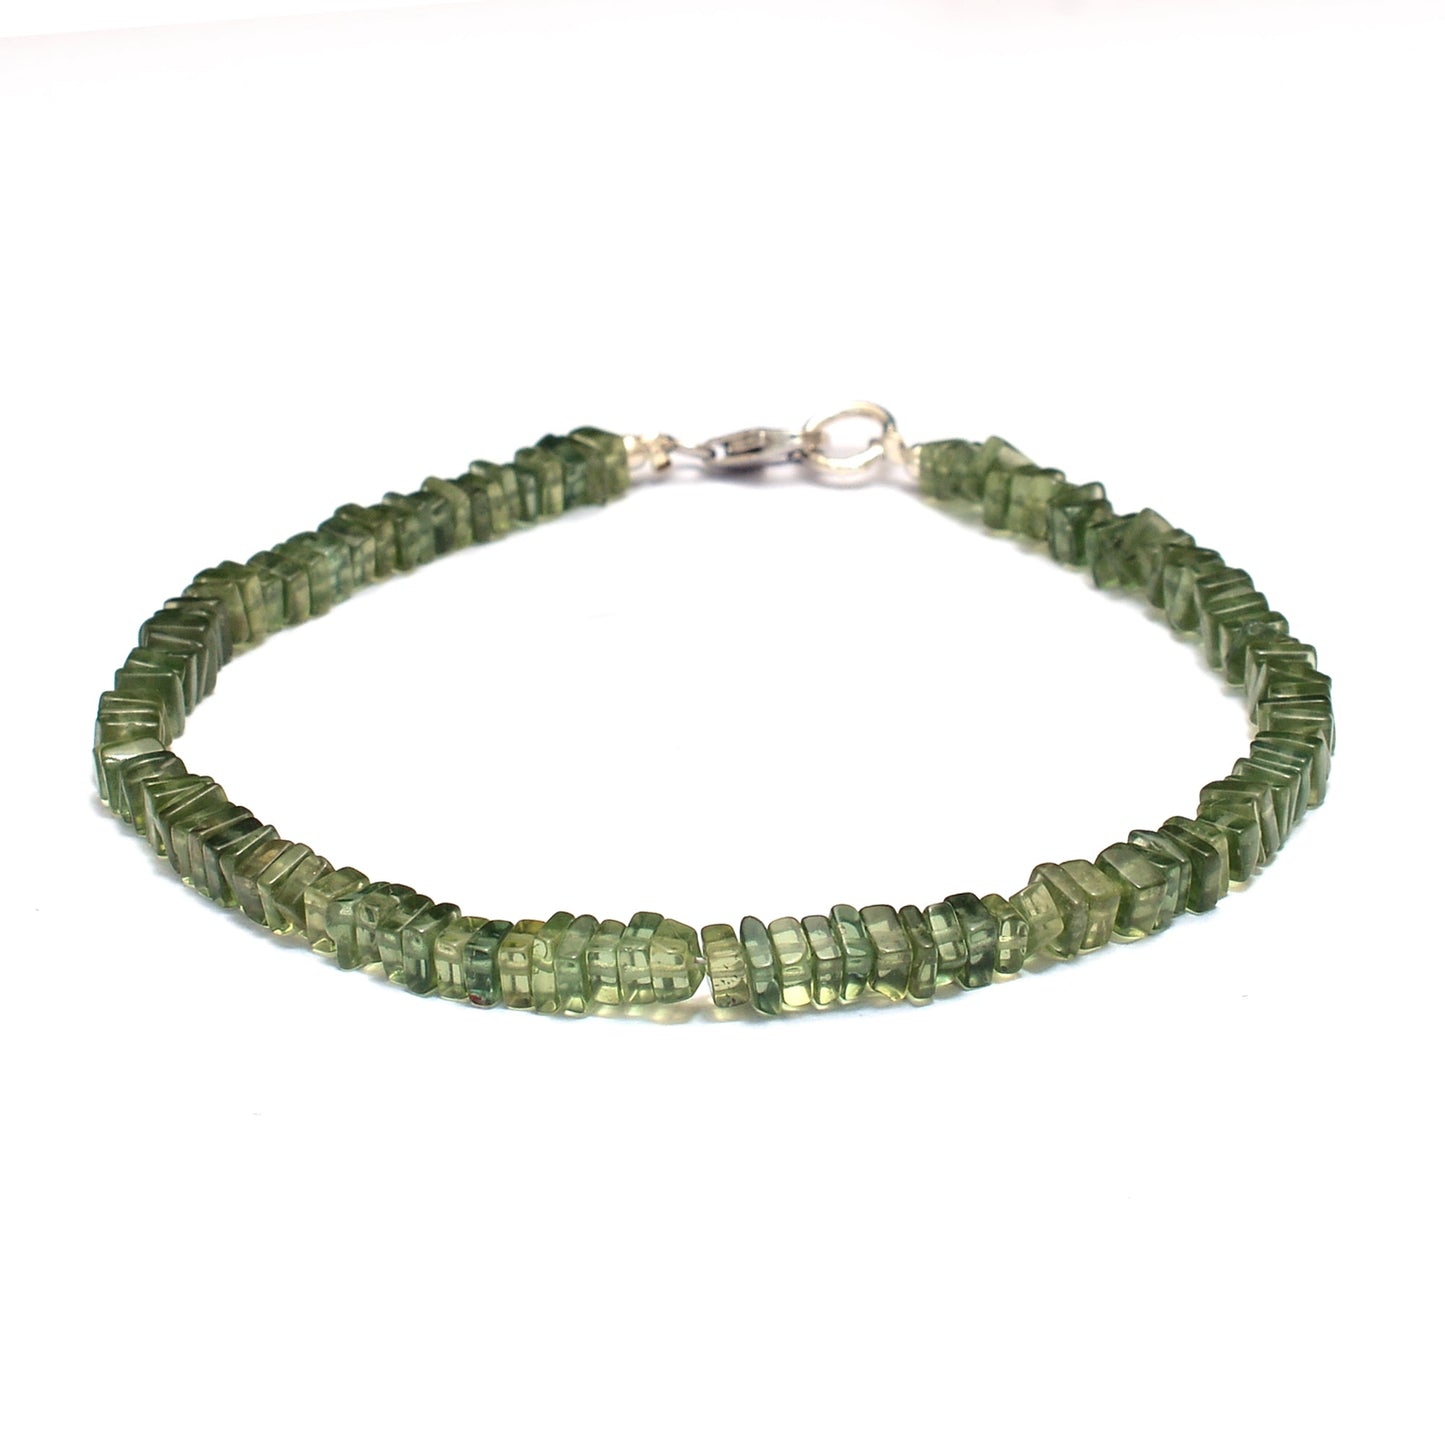 Natural Green Apatite Square Gemstone Bracelet | Adorable Jewelry Gift For Her GemsRush